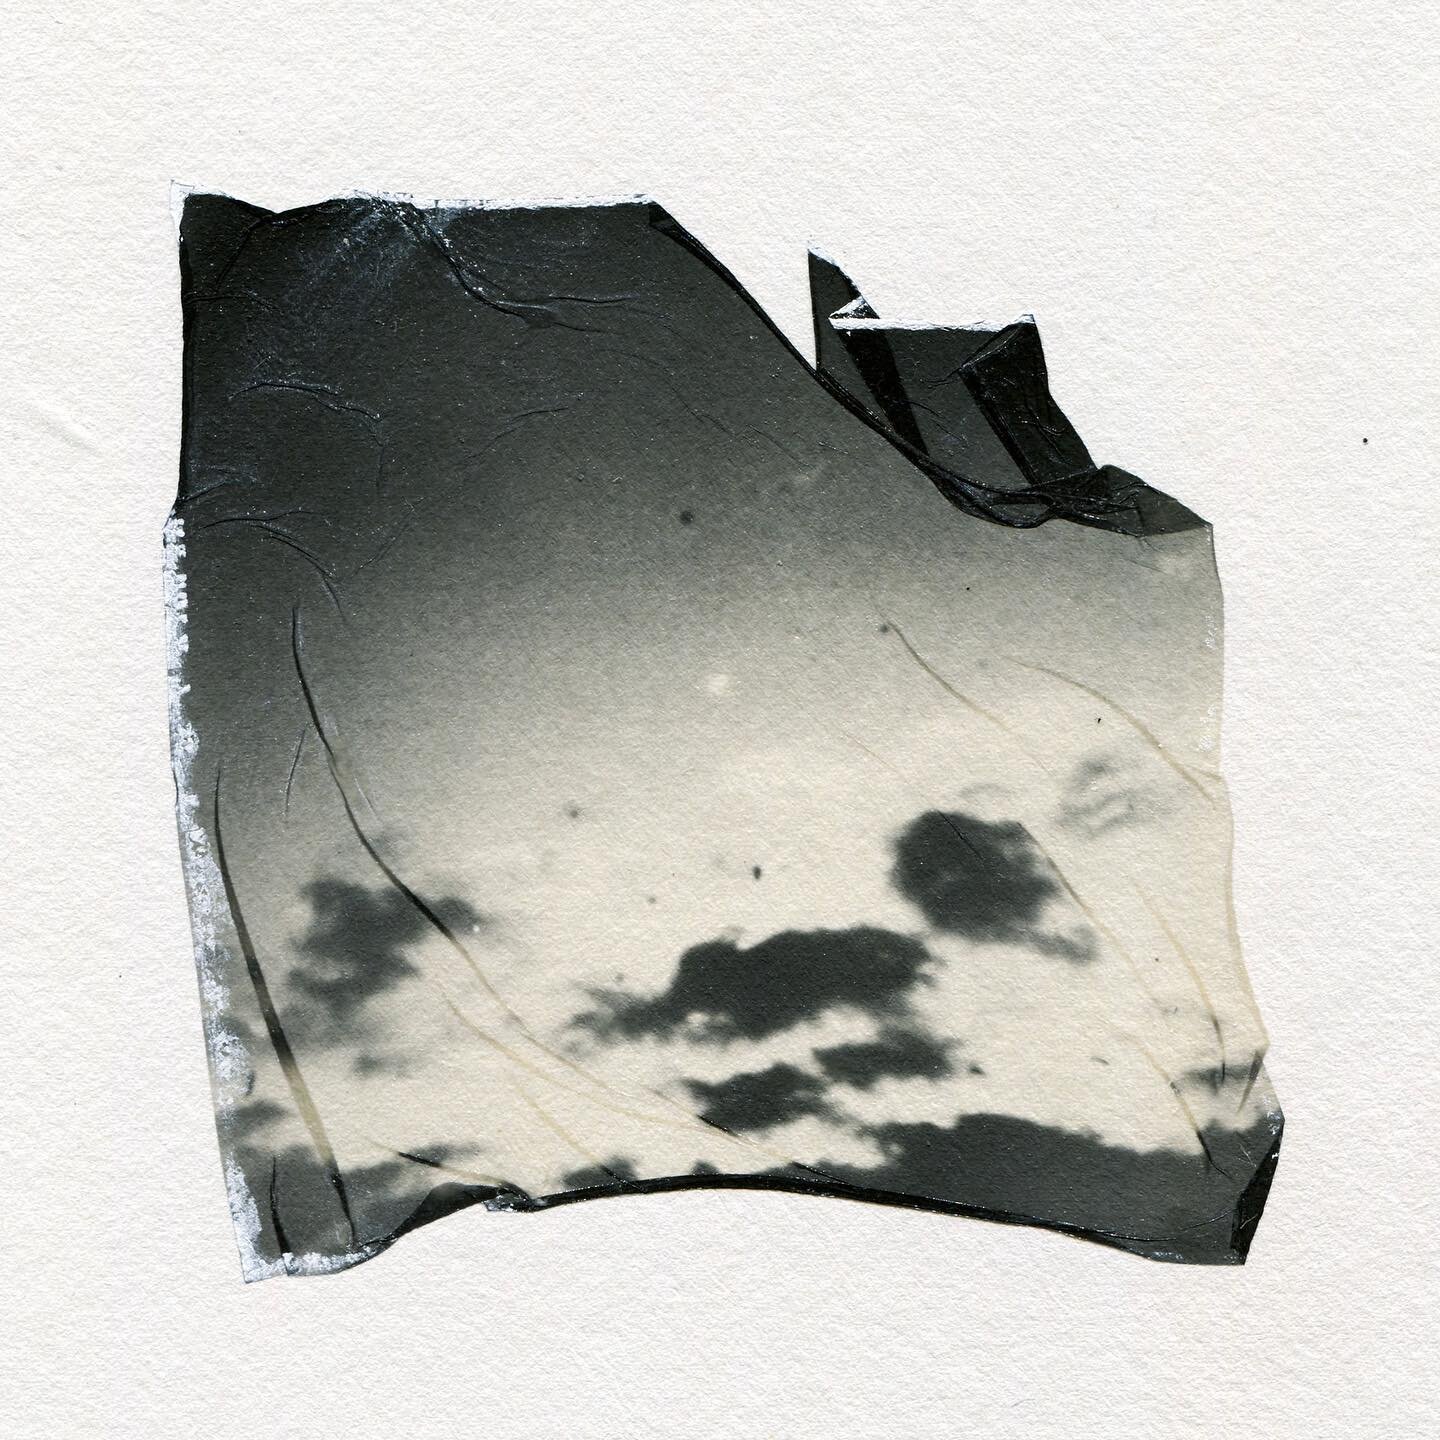 ~ Polaroid Lift I &ndash;&nbsp;Dirty Bathroom Window &amp; The Moon~

I have already shared some first attempts with emulsion lifts/polaroid lifts with you in my stories. I was very satisfied with this attempt, so I wanted to show it. I know it's not